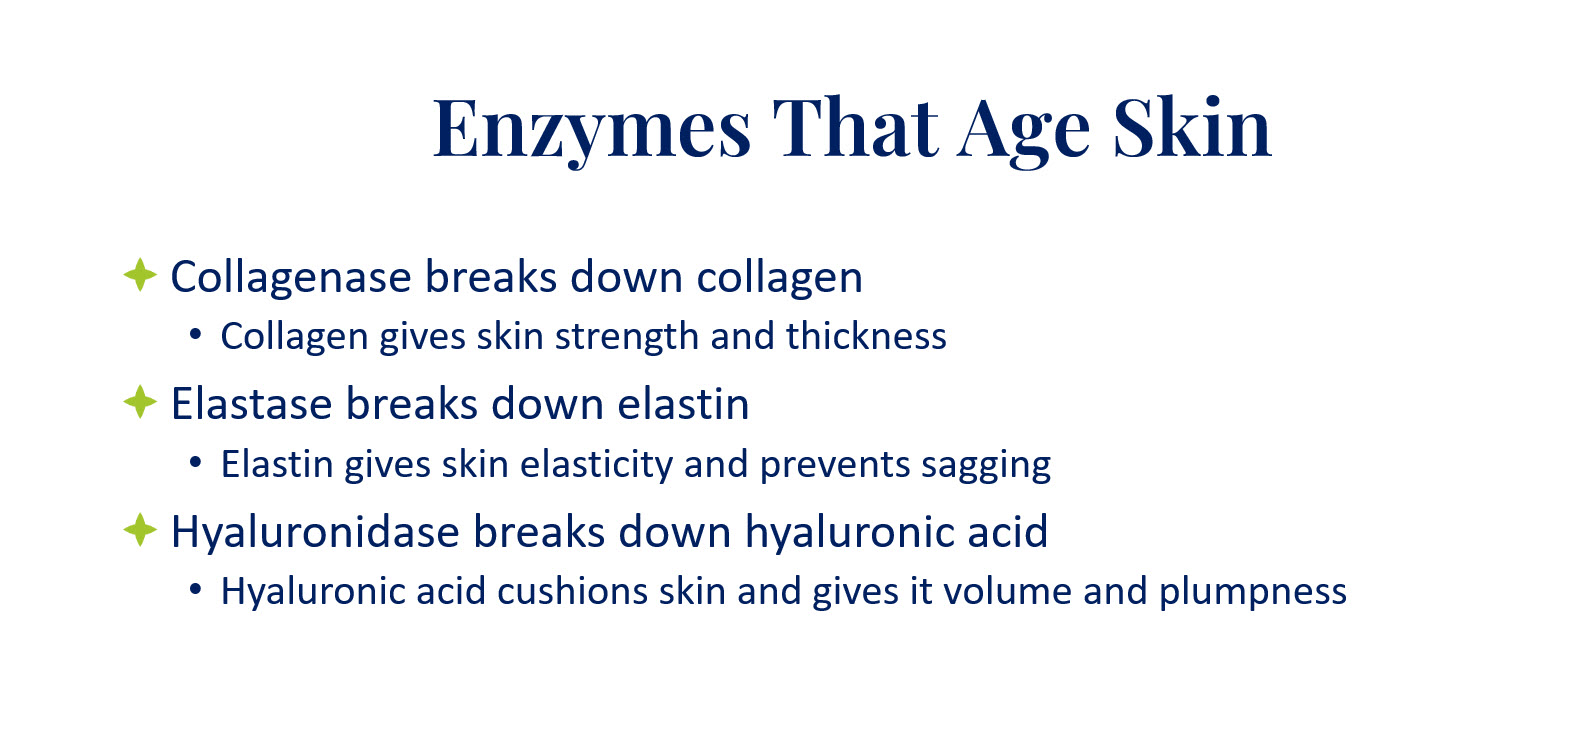 different enzymes that age skin